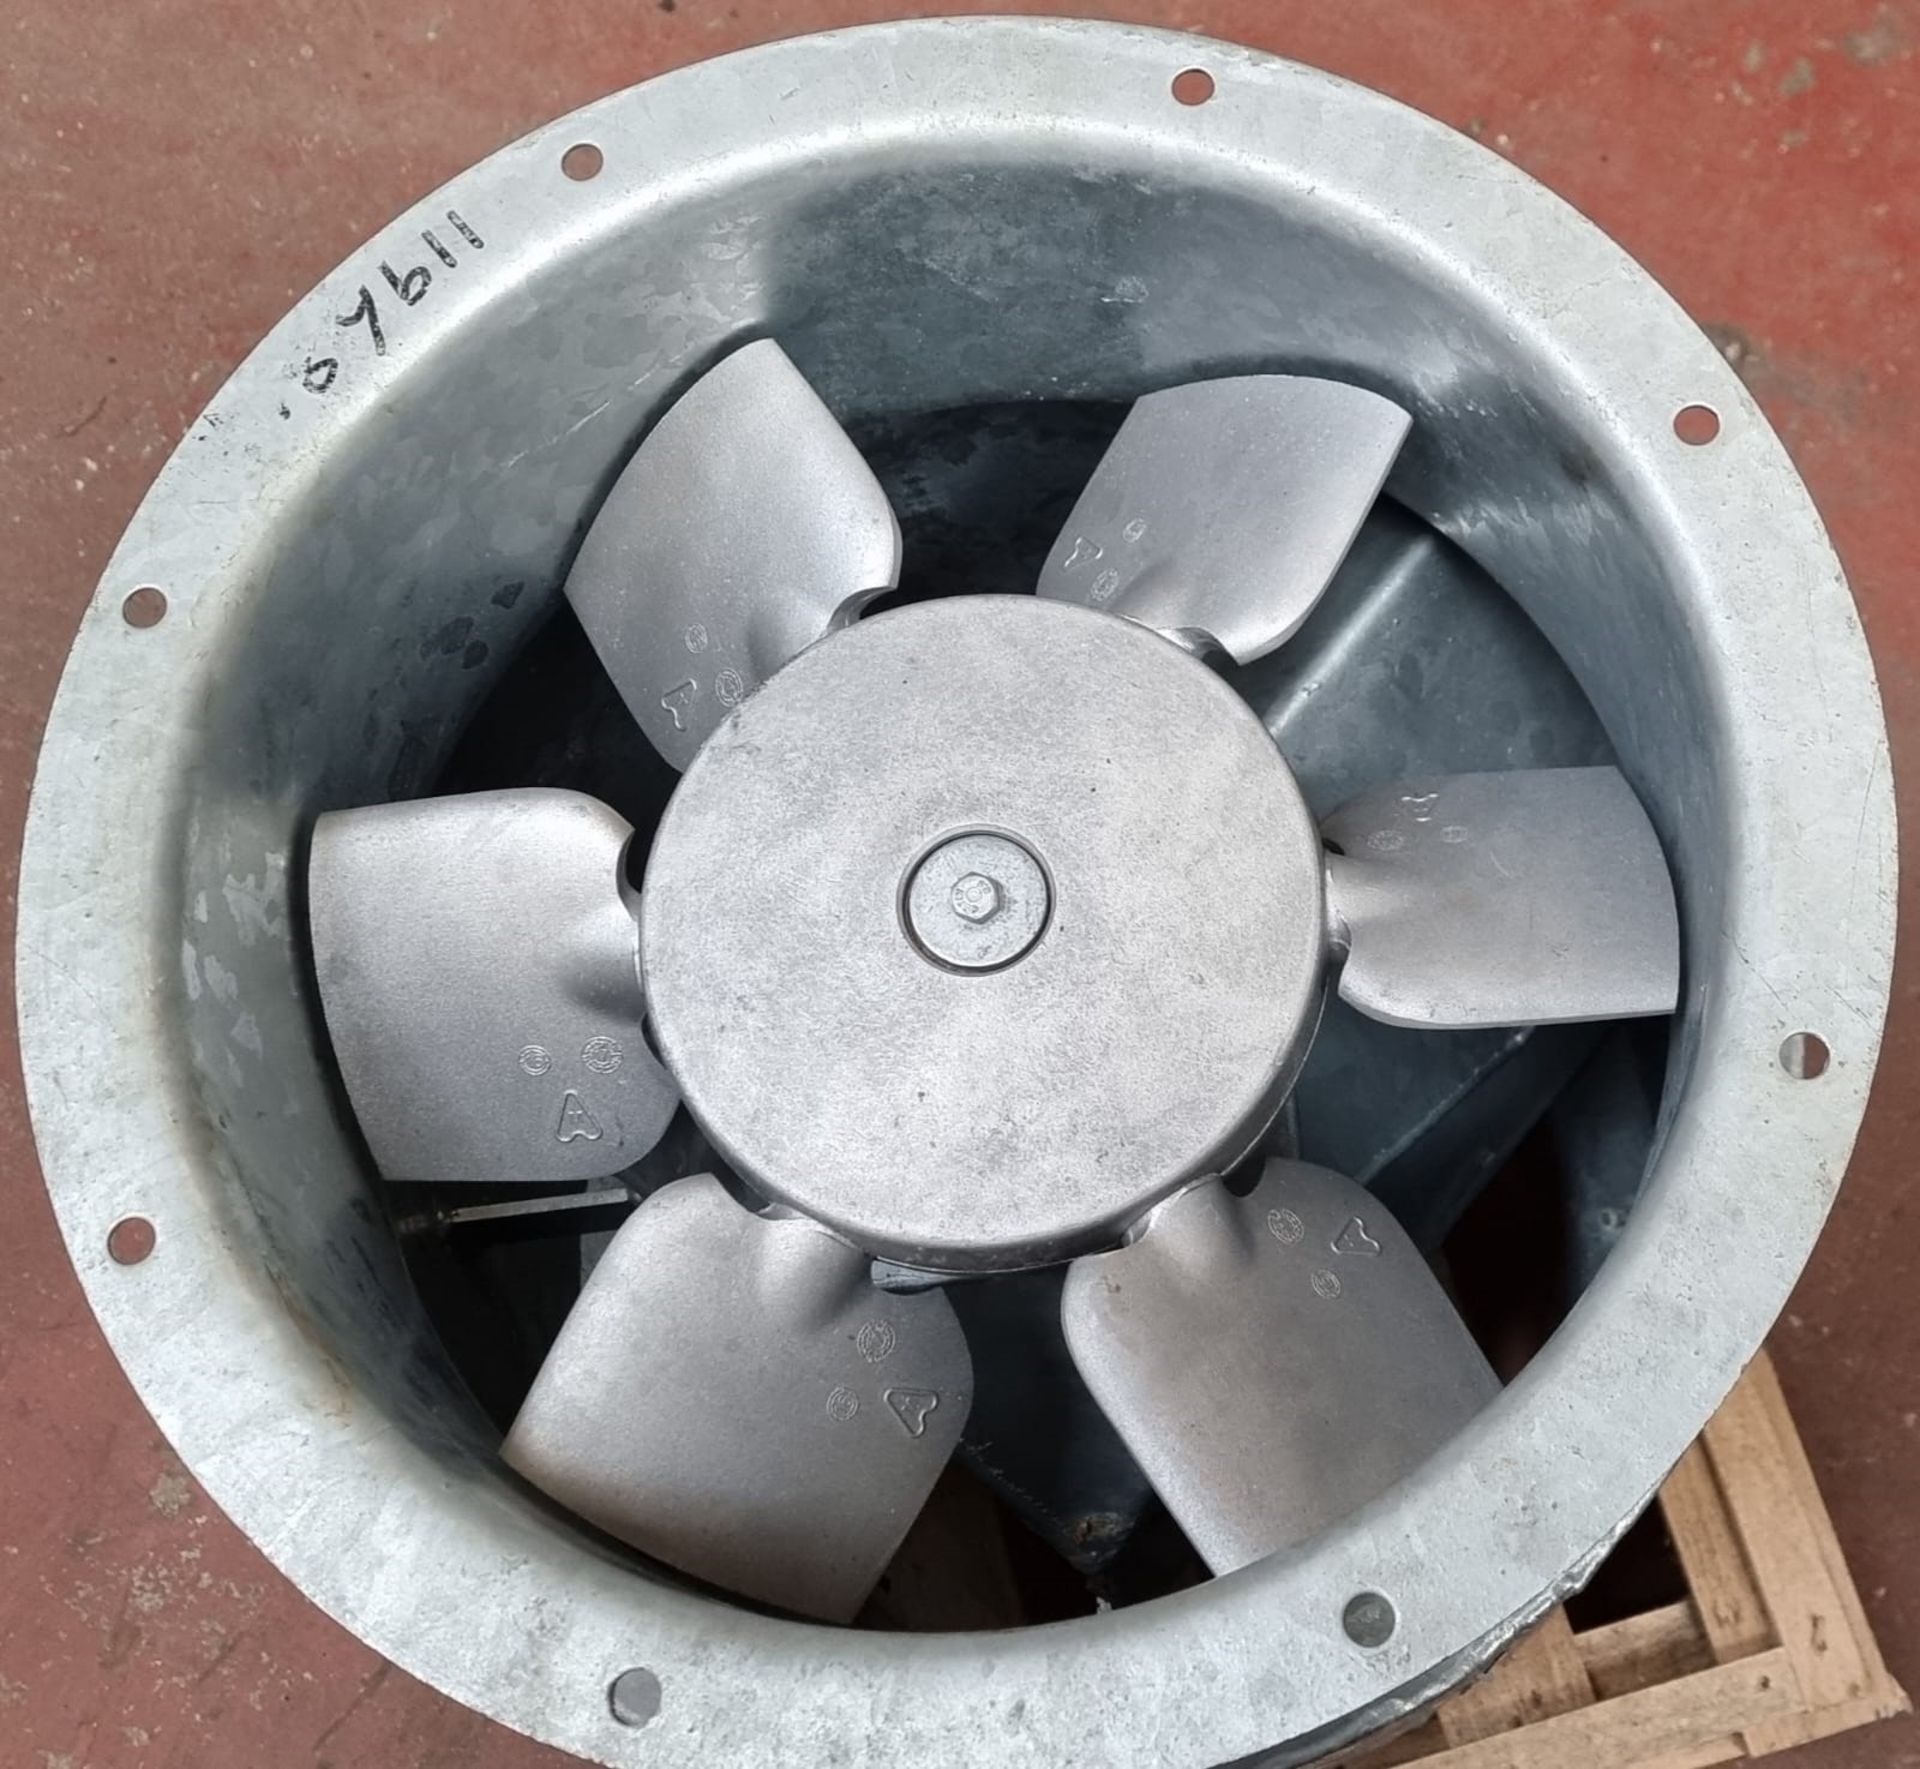 Flaktwoods 400mm dia. Fan, loading free of charge - yes, lot located in Bradford, West - Image 3 of 6